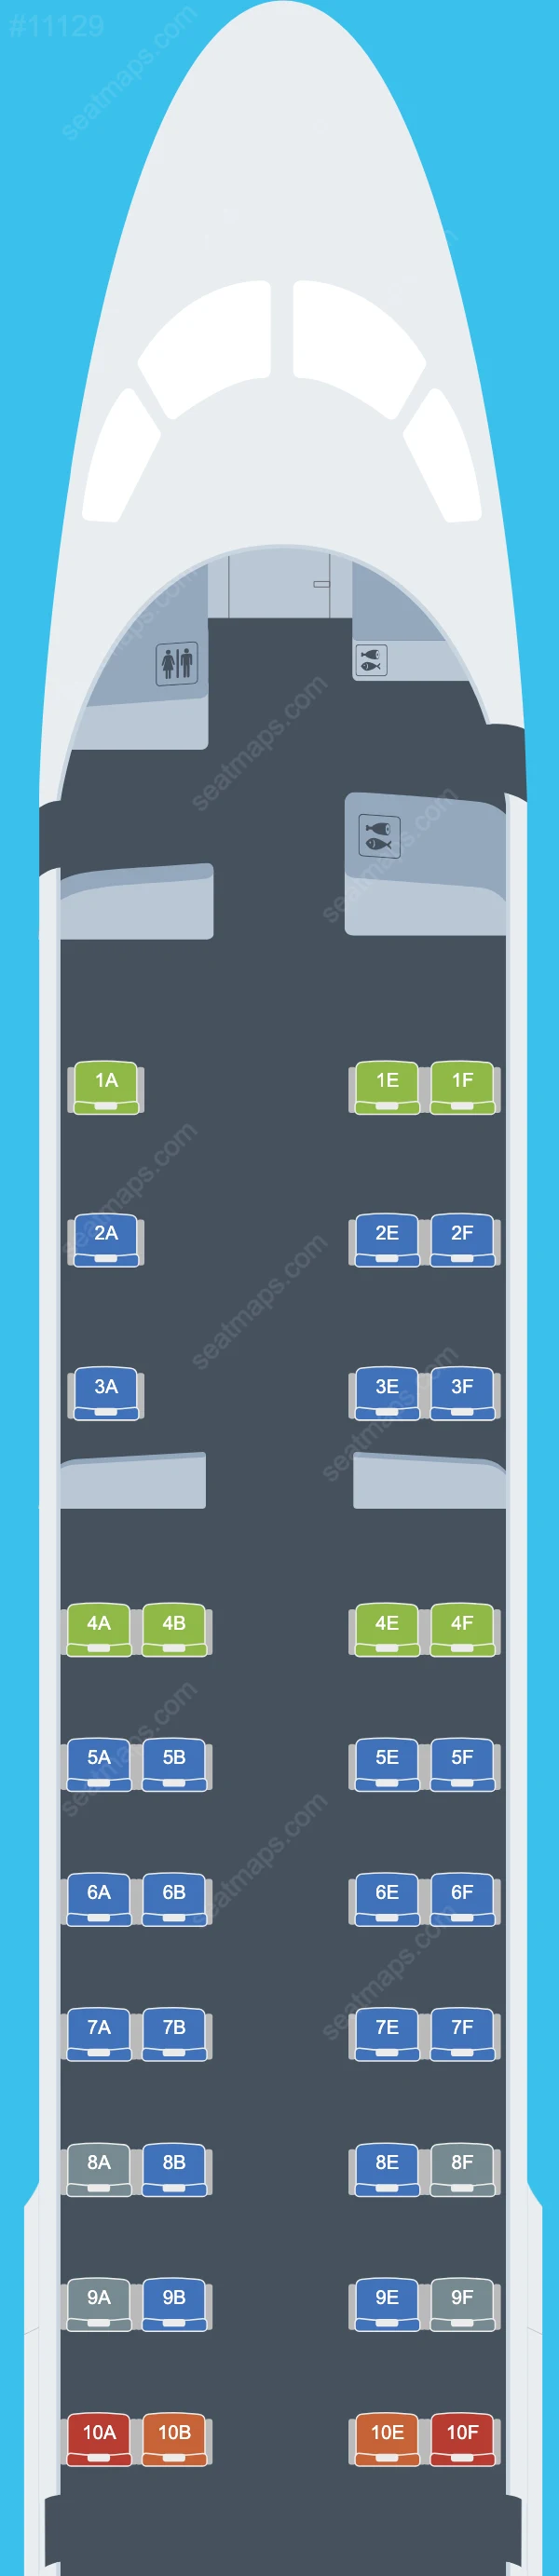 Alliance Airlines Embraer E190 V.1 seatmap mobile preview